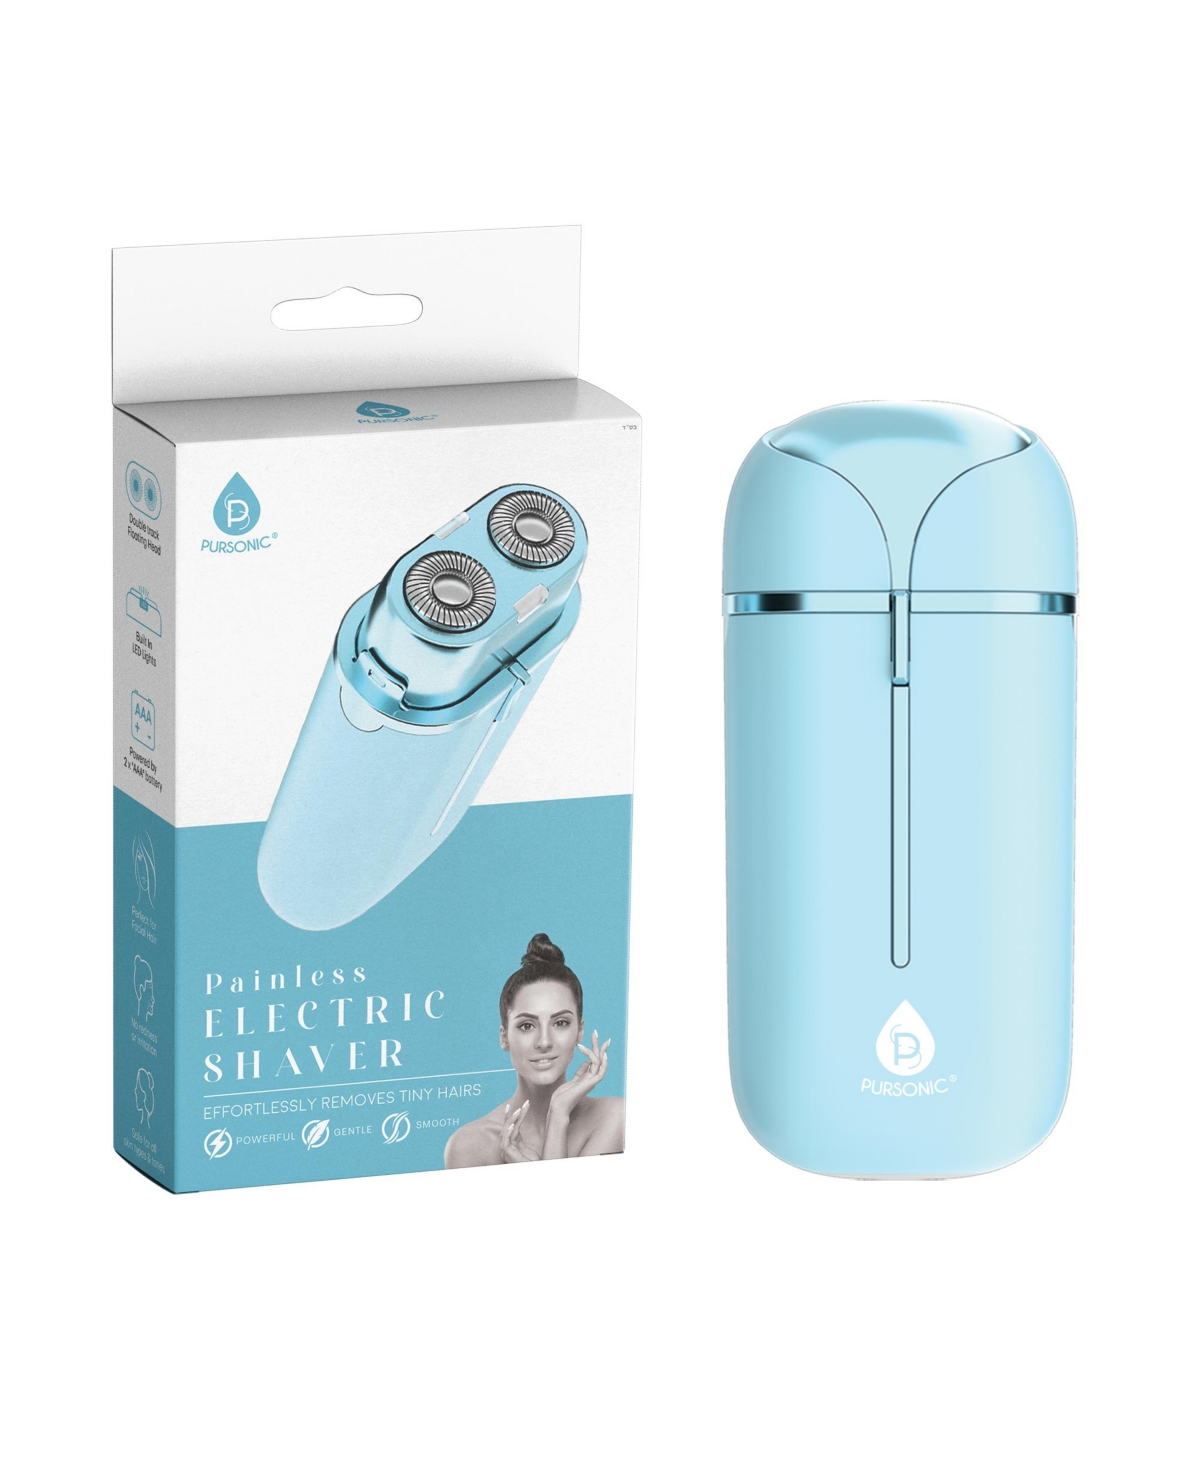 Painless Electric Shaver - Blue